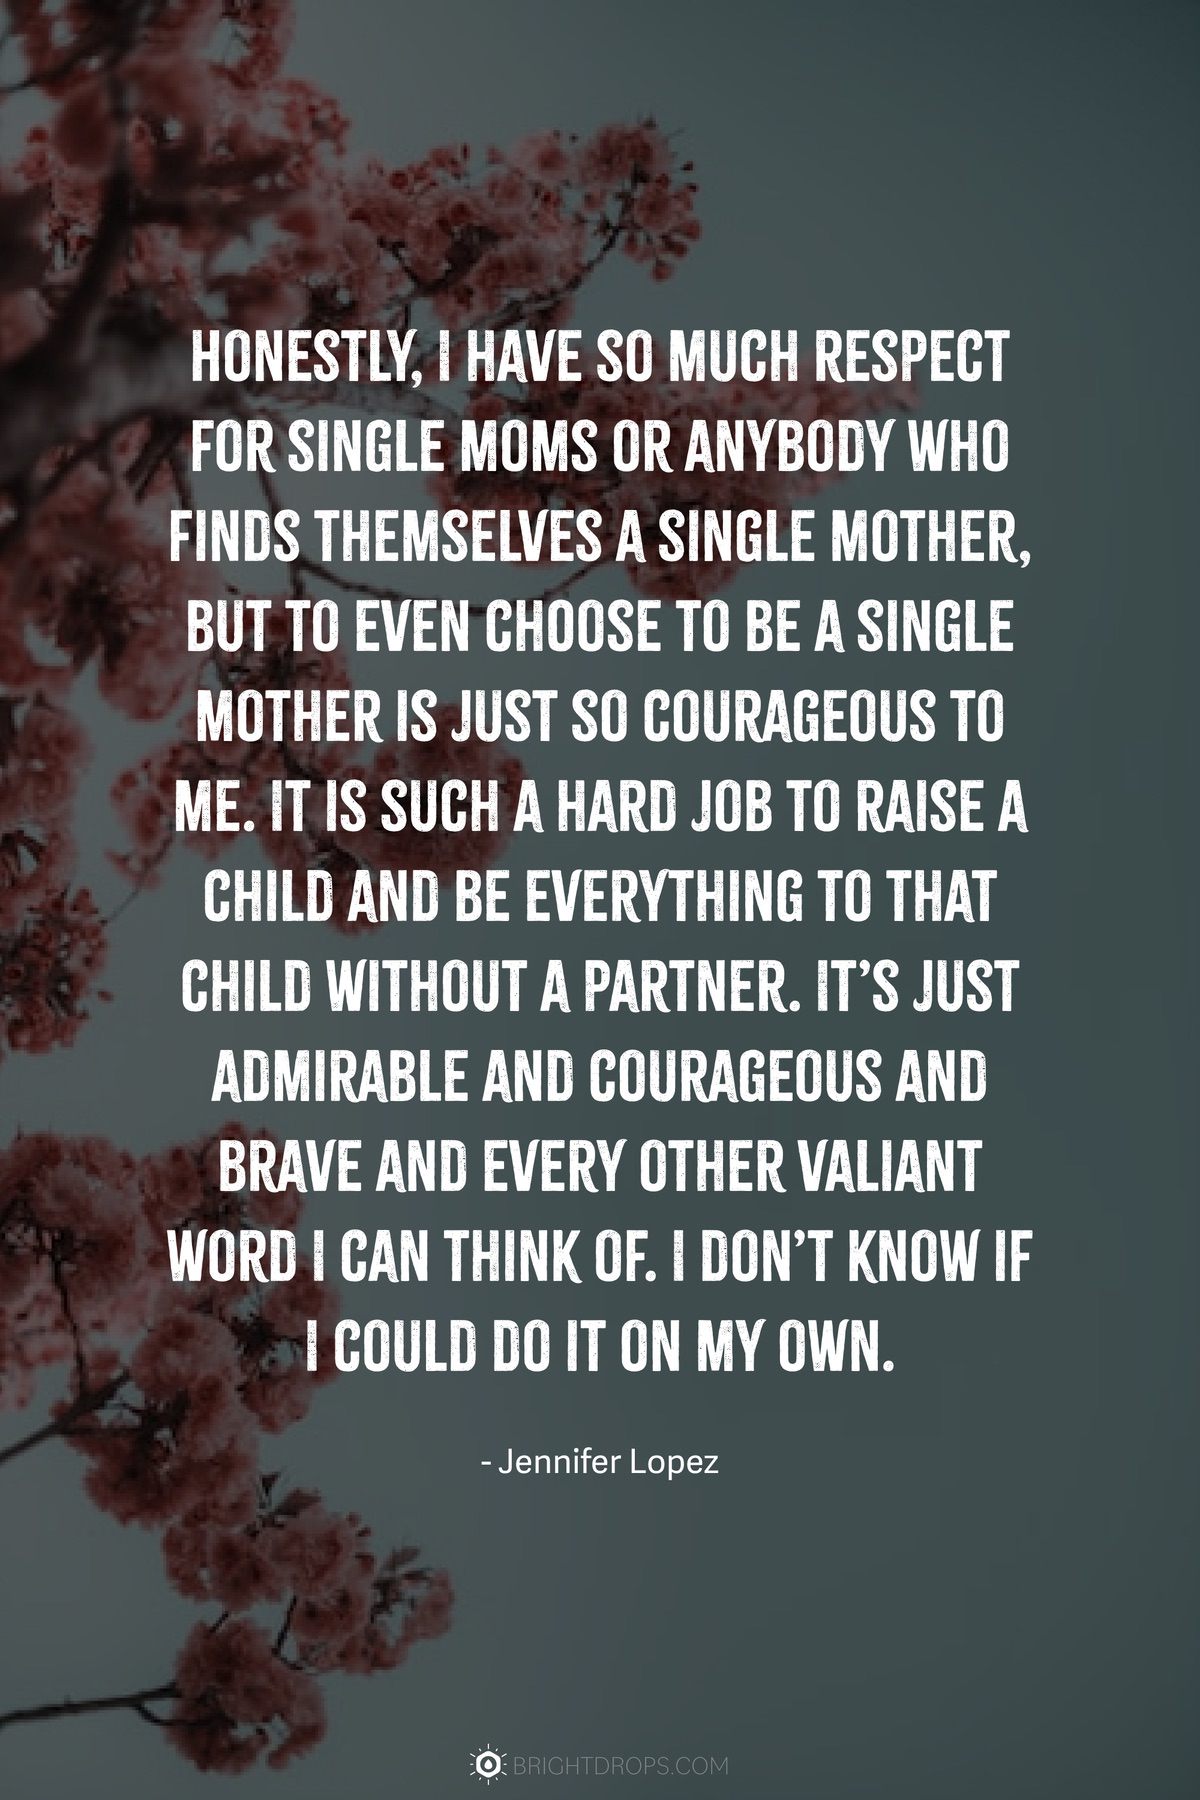 Honestly, I have so much respect for single moms or anybody who finds themselves a single mother, but to even choose to be a single mother is just so courageous to me. It is such a hard job to raise a child and be everything to that child without a partner. It’s just admirable and courageous and brave and every other valiant word I can think of. I don’t know if I could do it on my own.